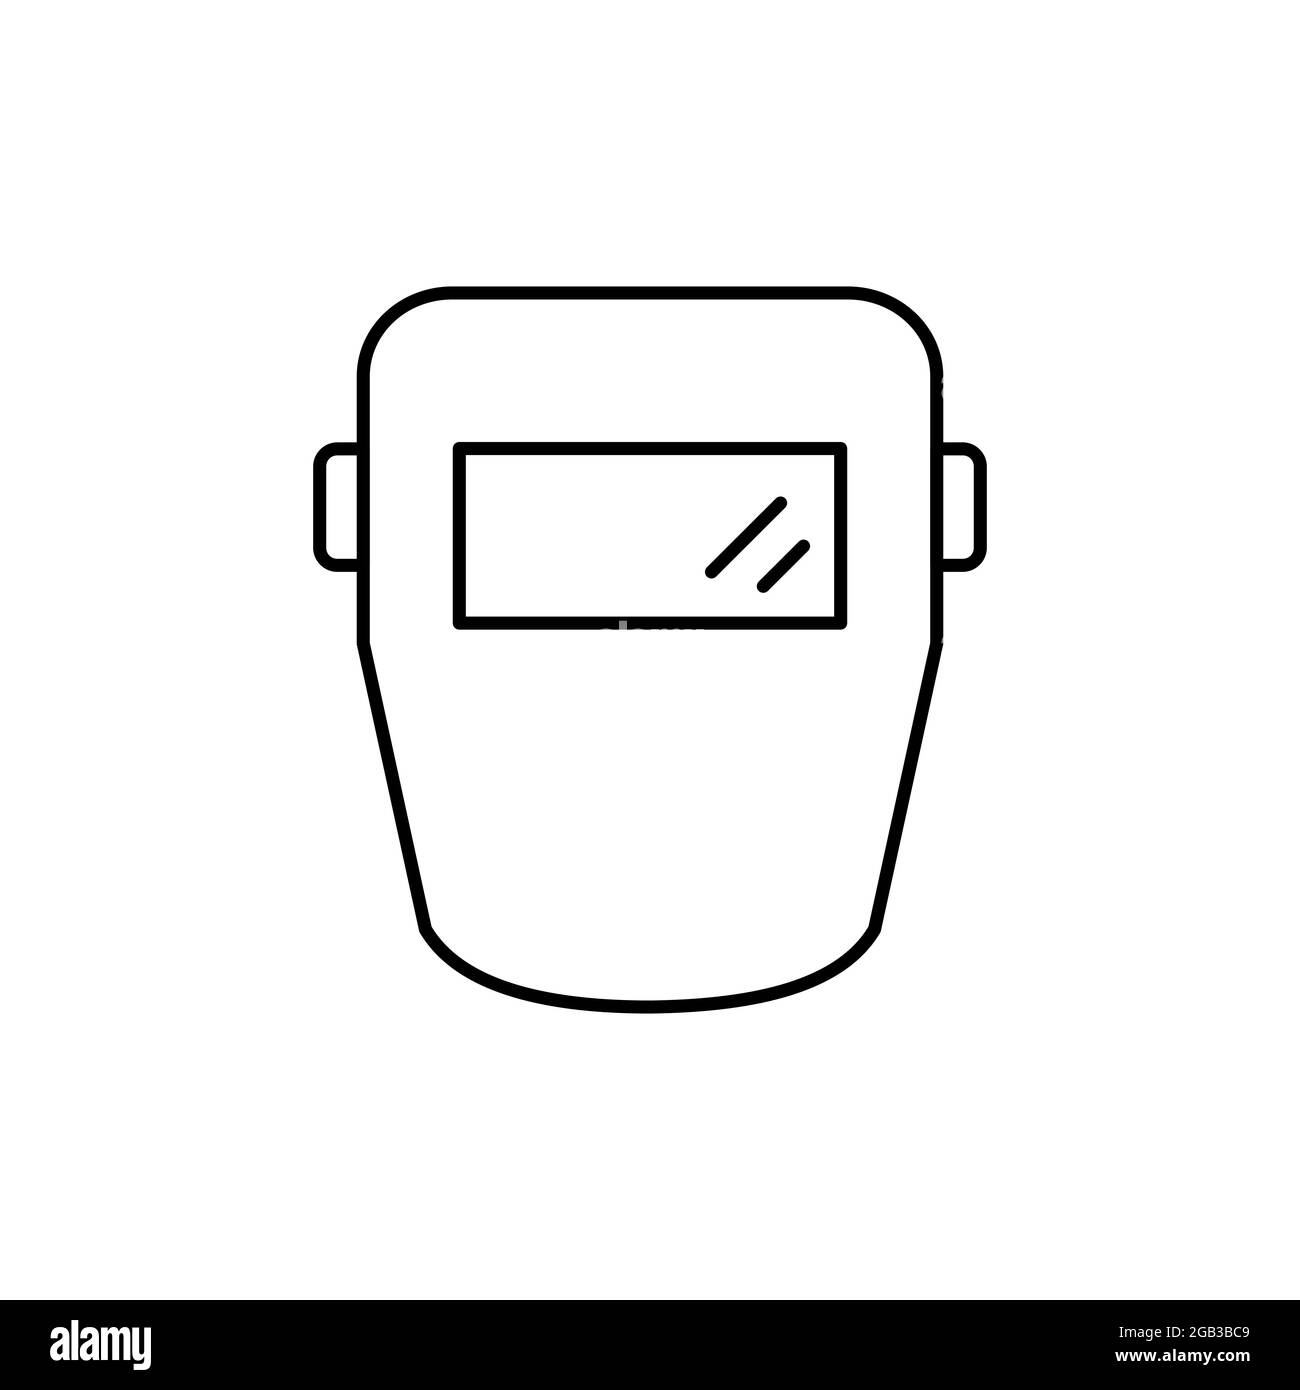 Welding mask line icon. Work safety symbol. Face shield outline. Welder personal protection equipment. Protective eyewear. Occupational safety gear. Stock Vector